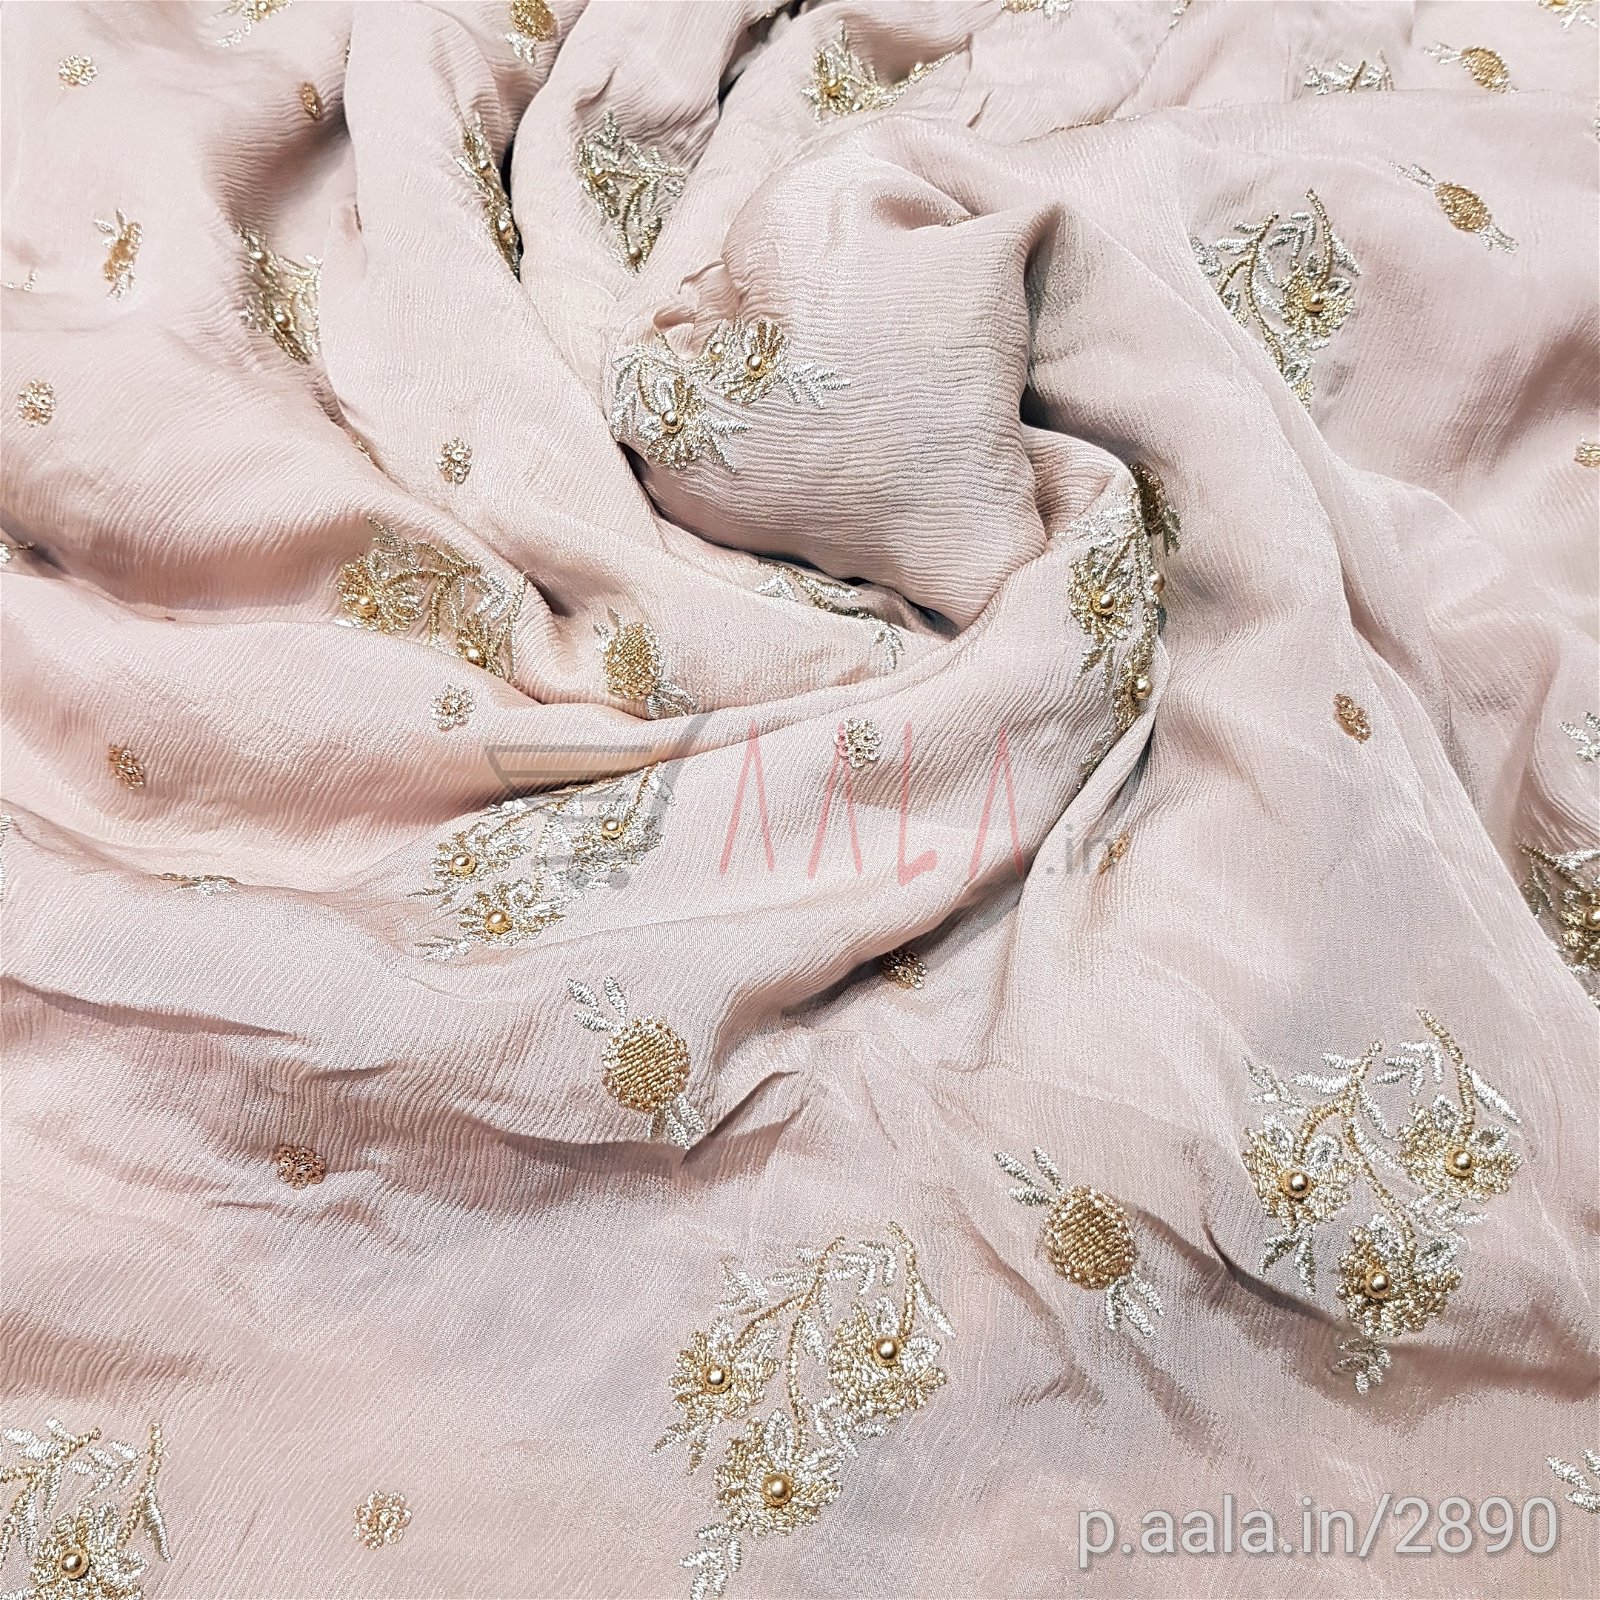 Hand Embroidered Crepe Chiffon Viscose 44 Inches Dyed Per Metre #2890